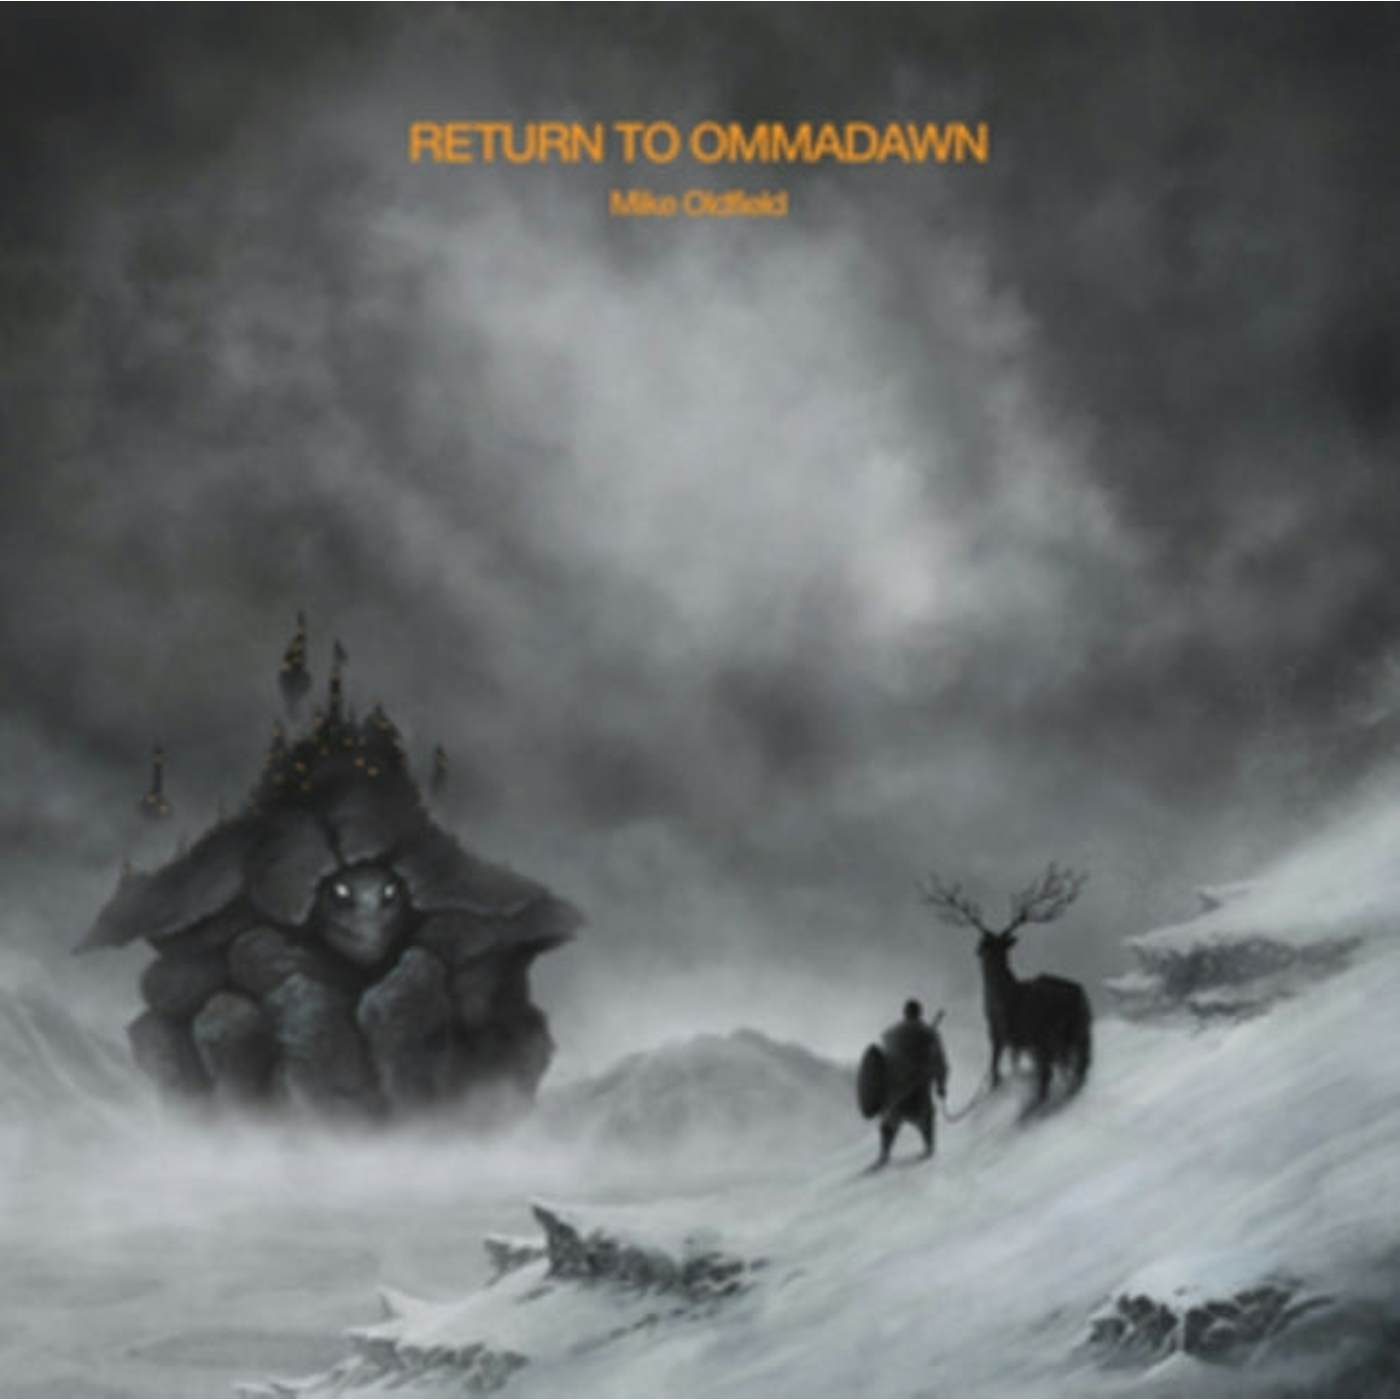 Mike Oldfield CD - Return To Ommadawn